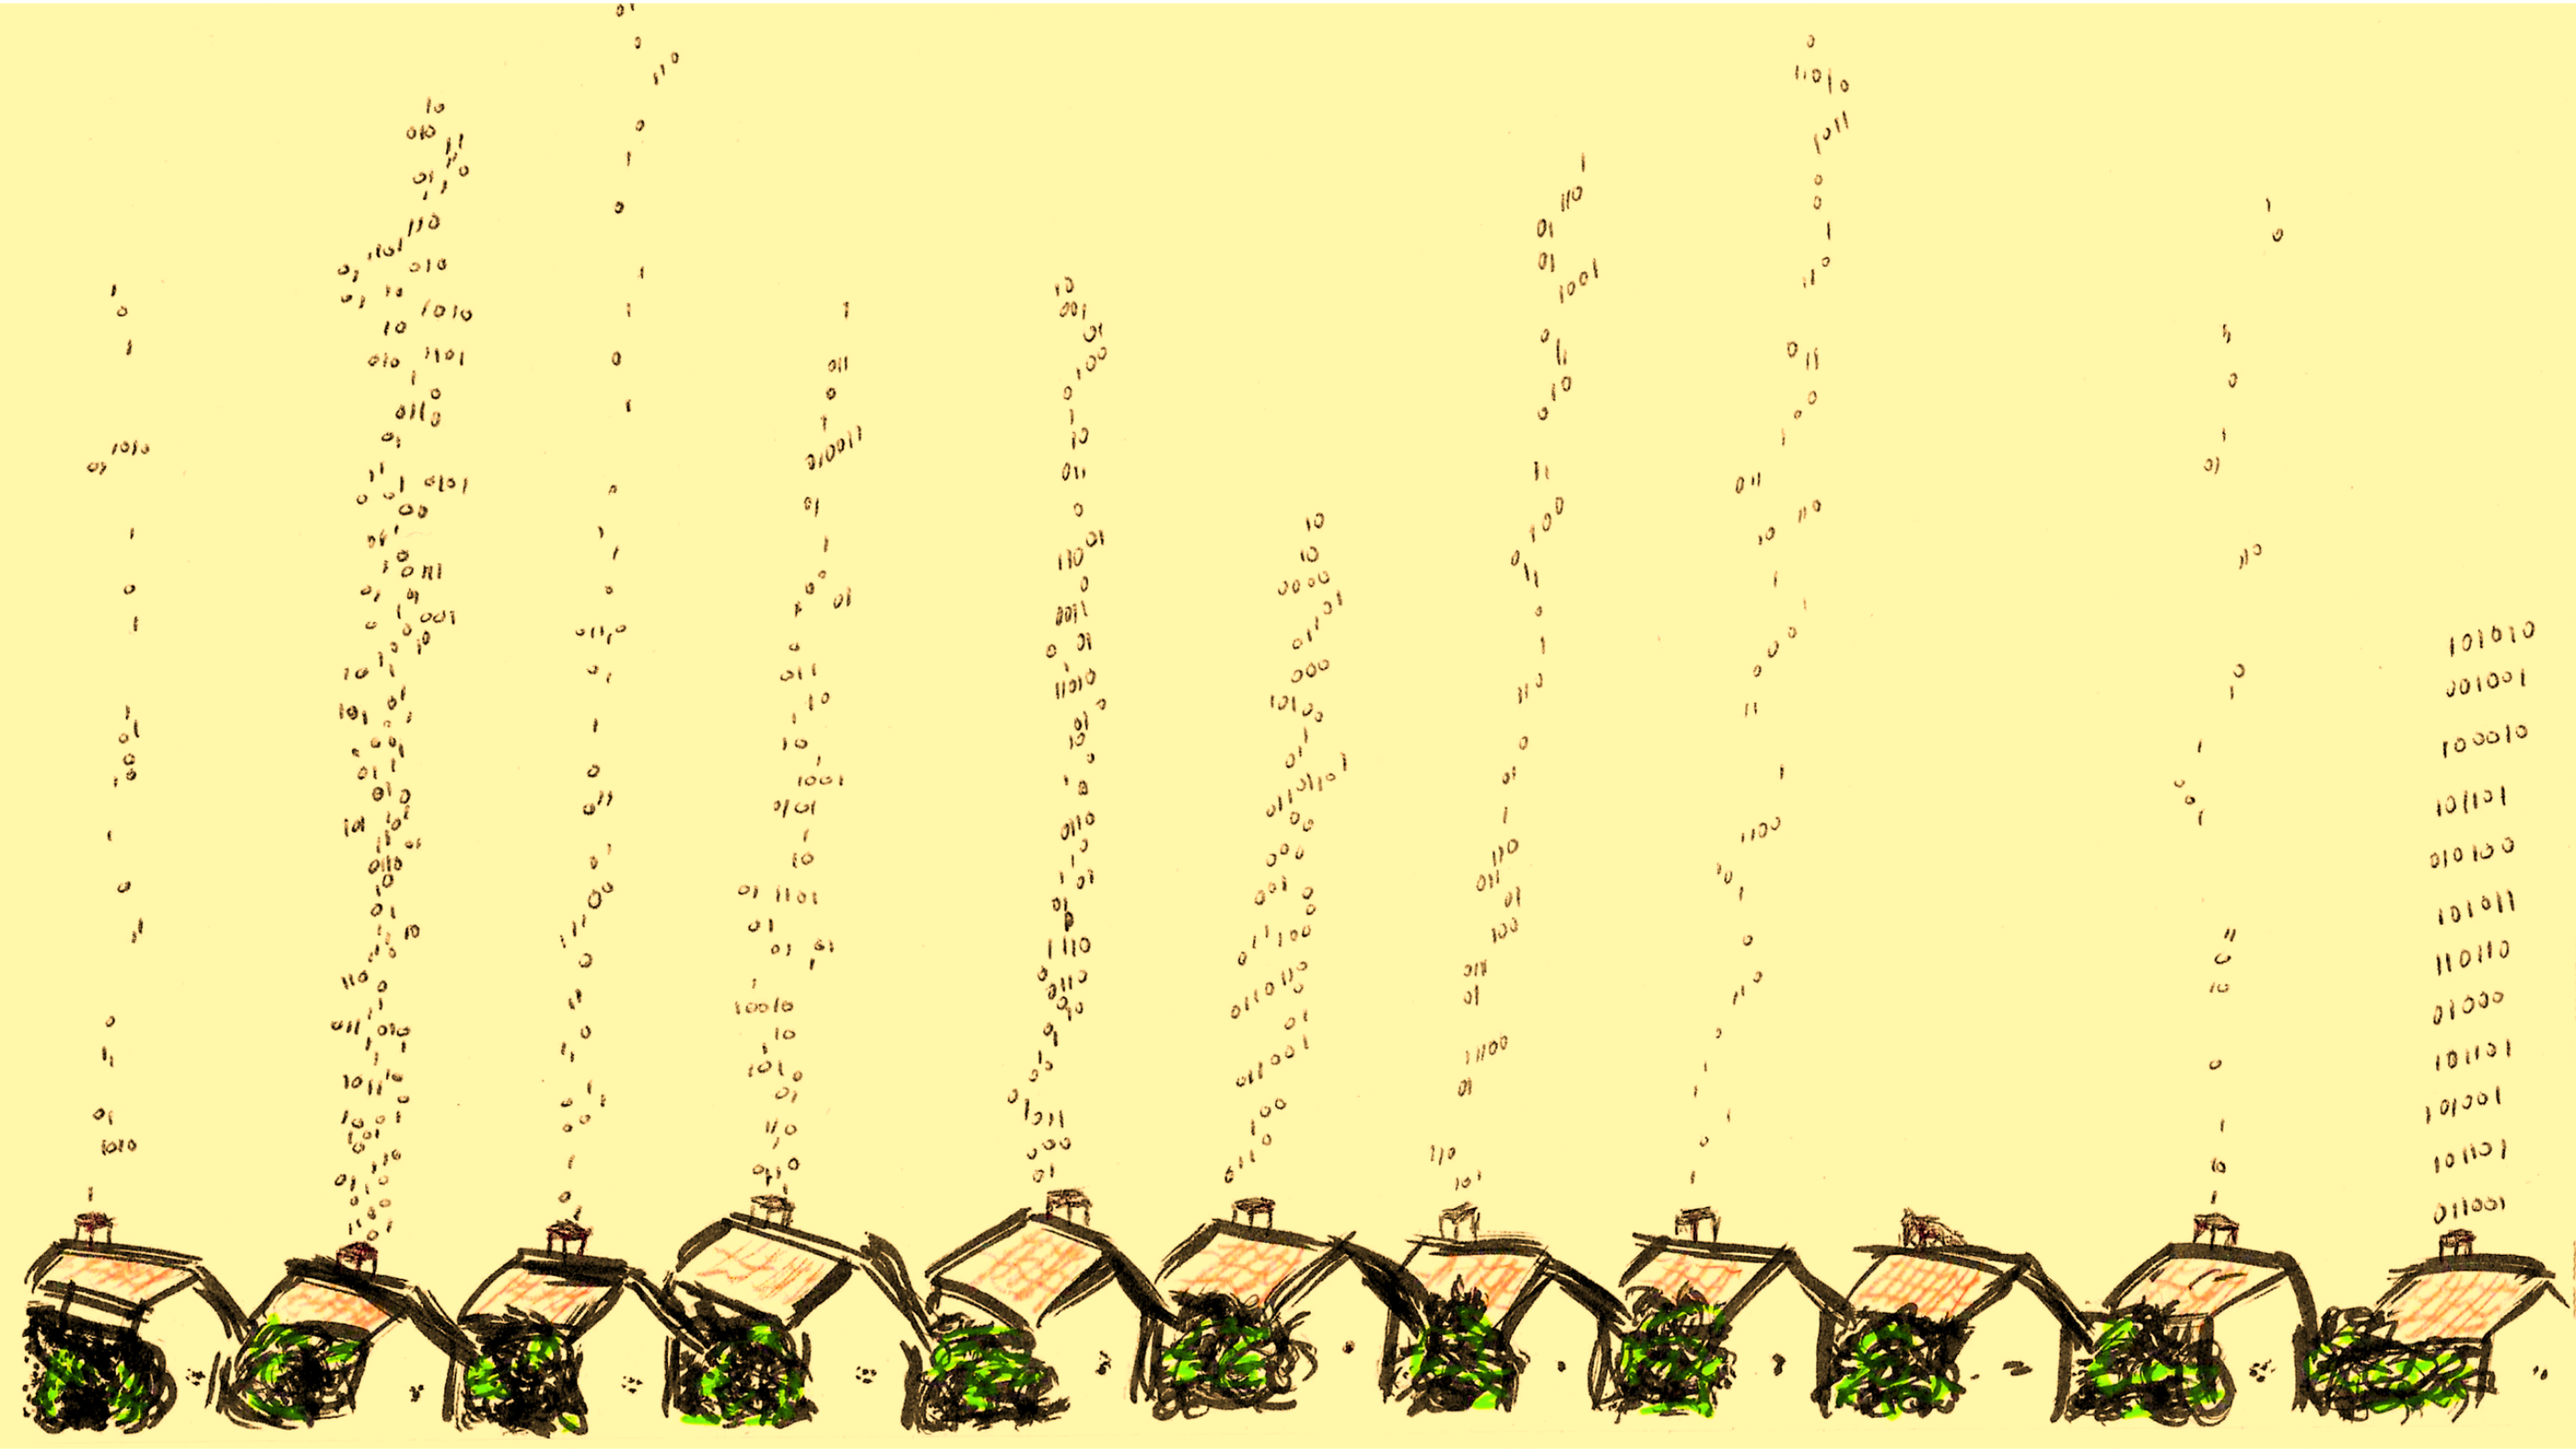 A hand-drawn sketch in coloured pens depicts a small uniform row of houses at the bottom of the picture. From each of the houses, 0s and 1s representing digital data are floating up in plumes which look like smoke from the chimneys of the houses; but these are not uniform: they represent the different types of data from each house.